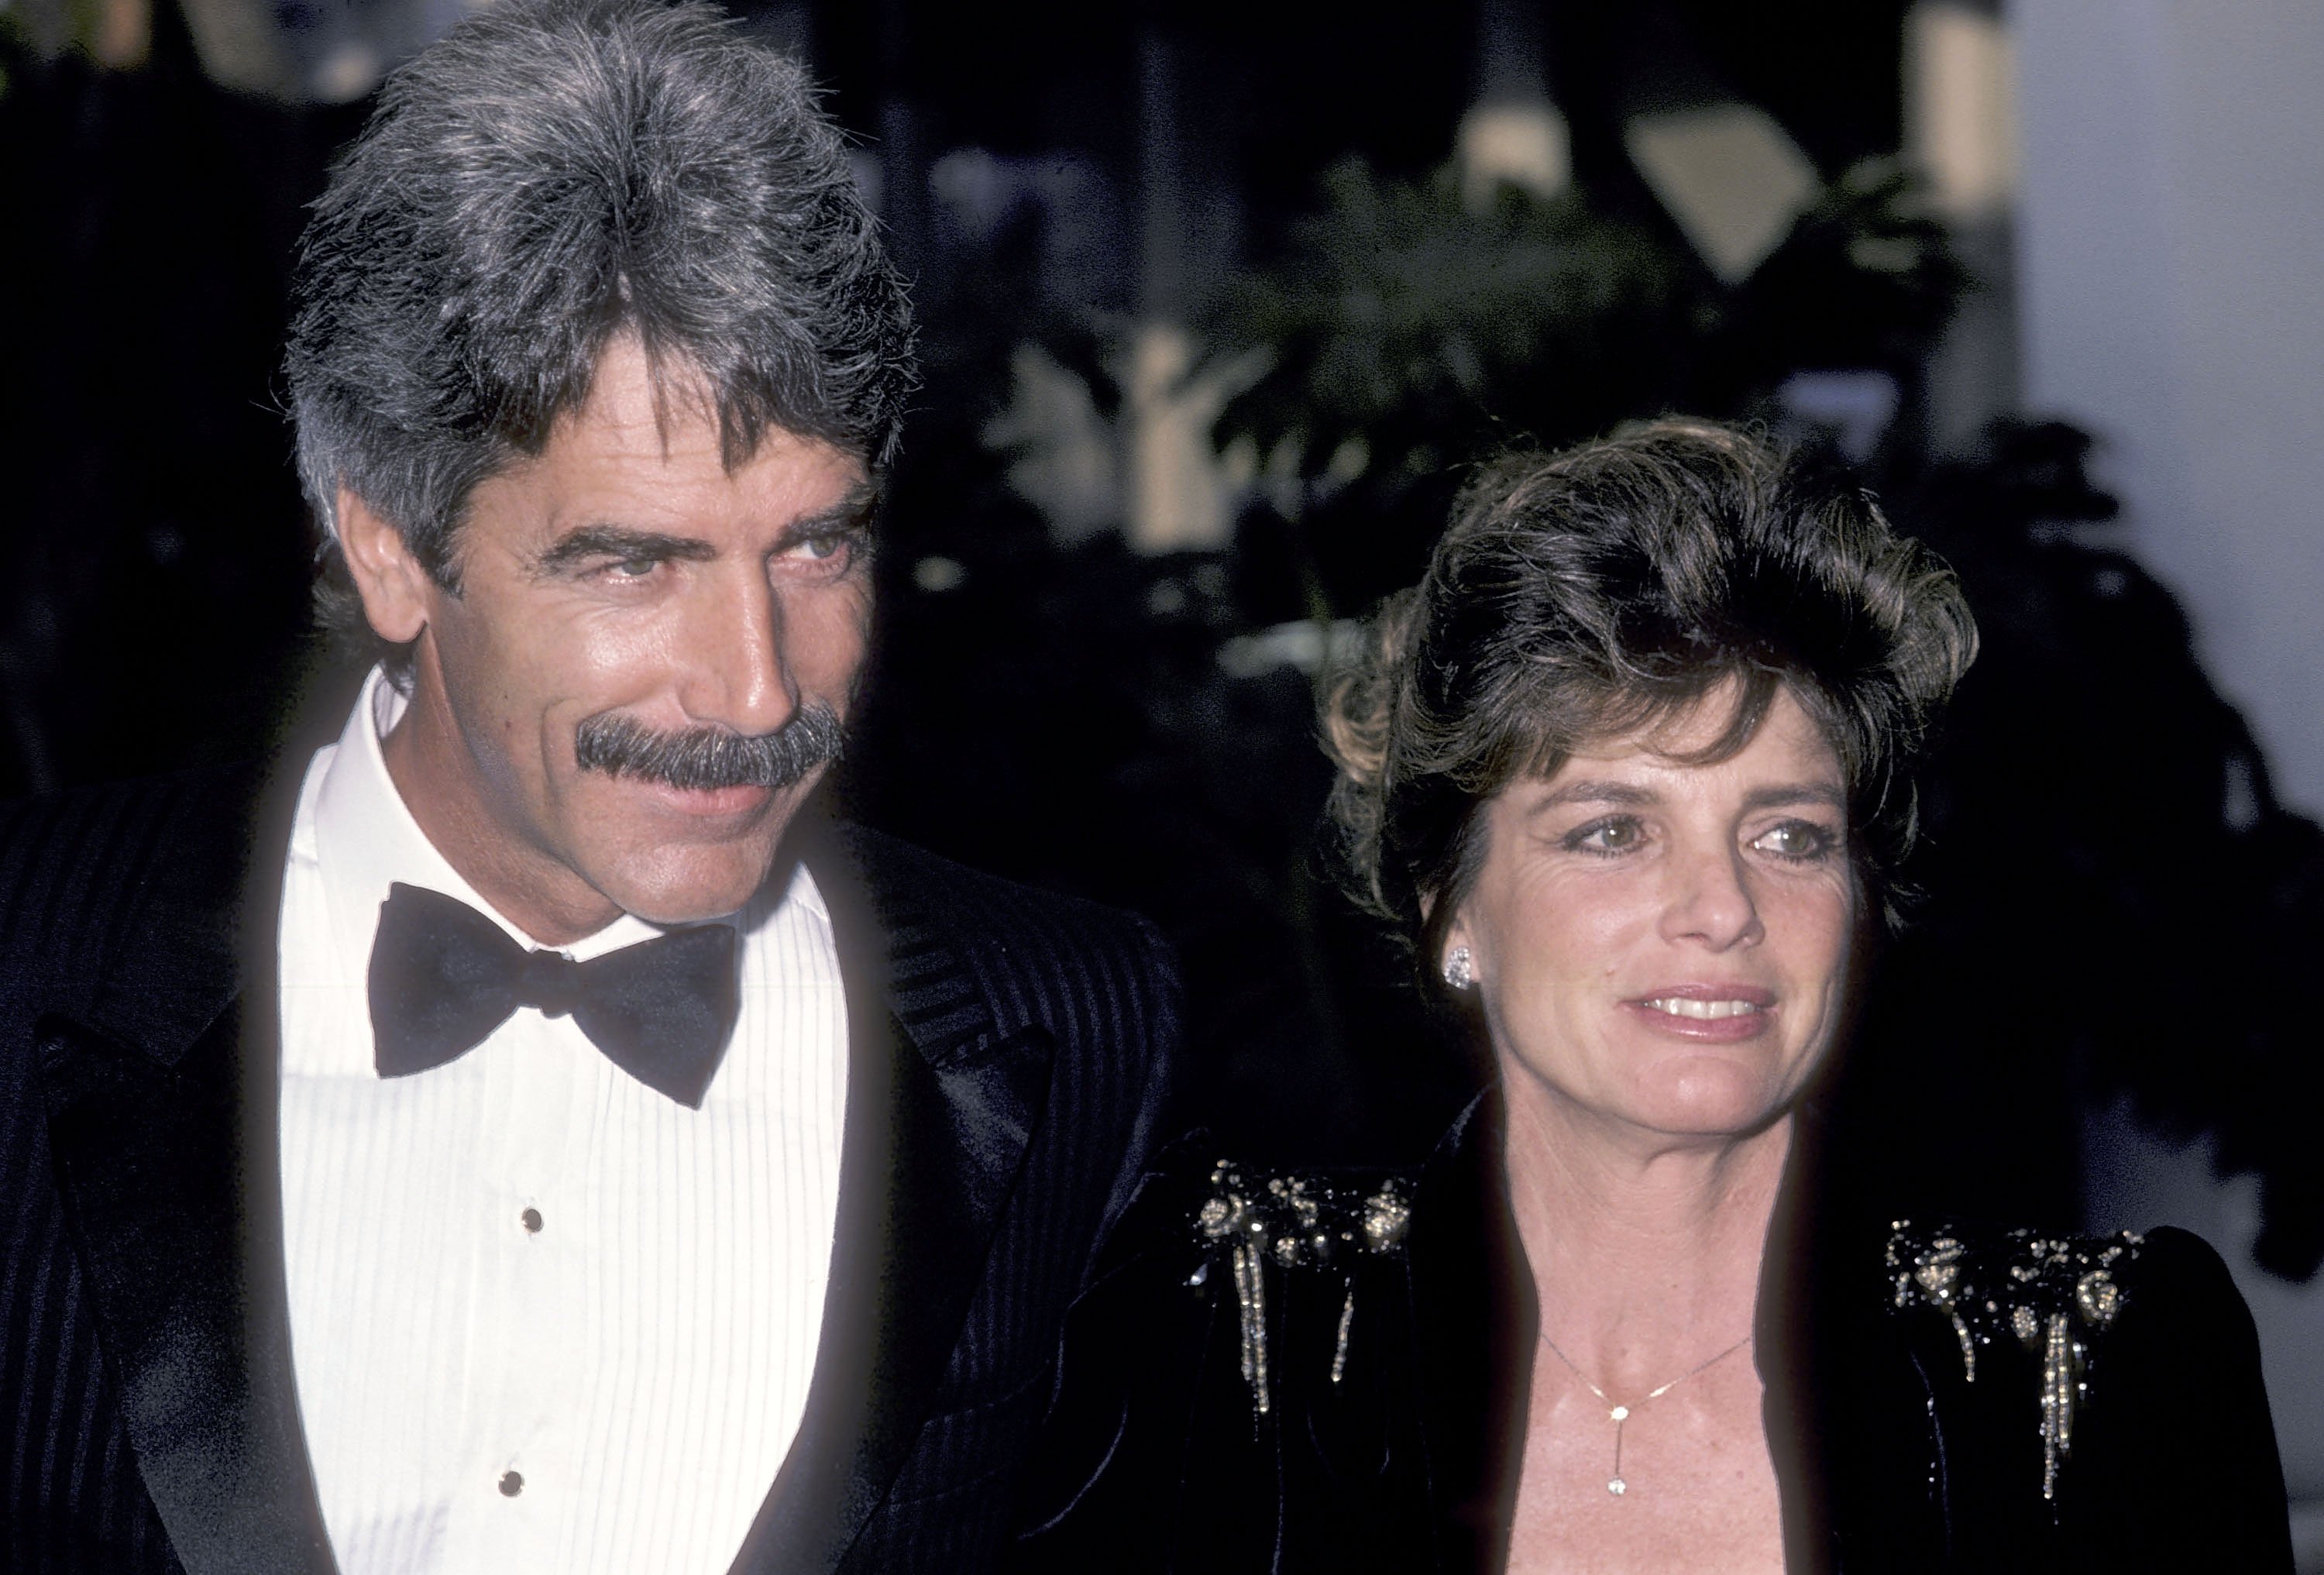  Actor Sam Elliott and actress Katharine Ross attend the 12th Annual People's Choice Awards on March 11, 1986 at the Santa Monica Civic Auditorium in Santa Monica, California | Source: Getty Images